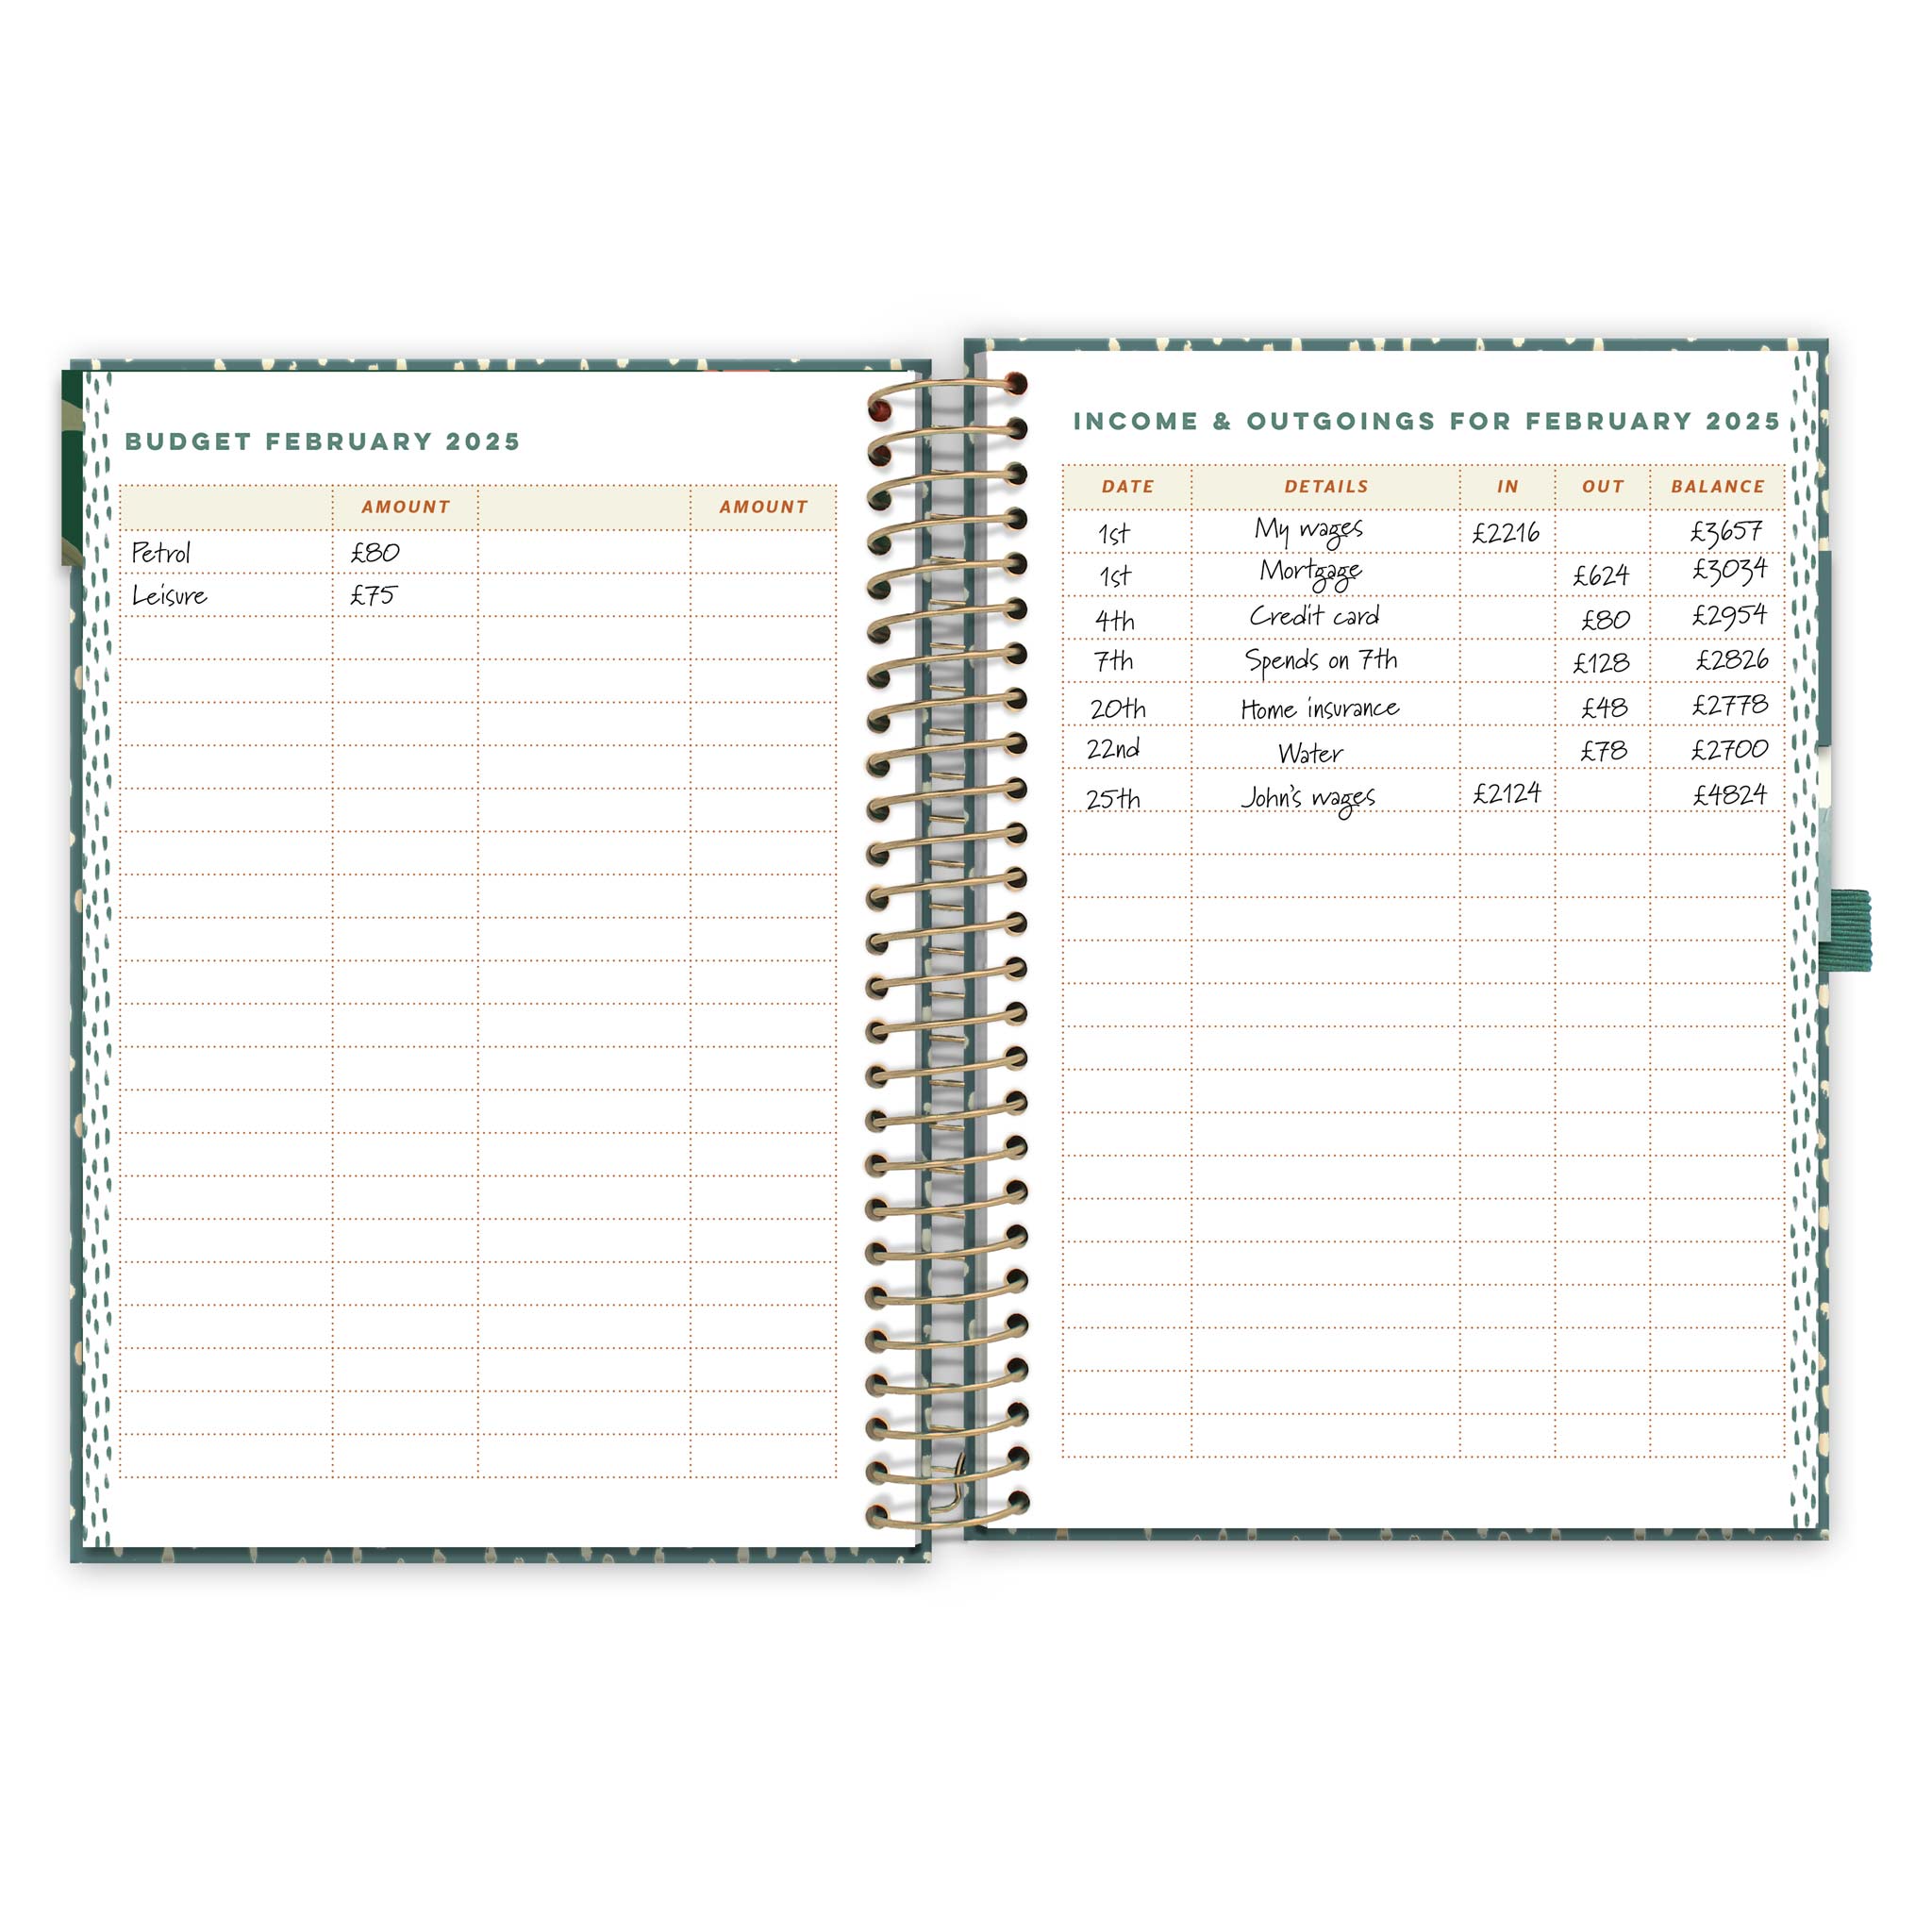 An open diary spread with a budget page for February 2025 and an income and outgoings page.